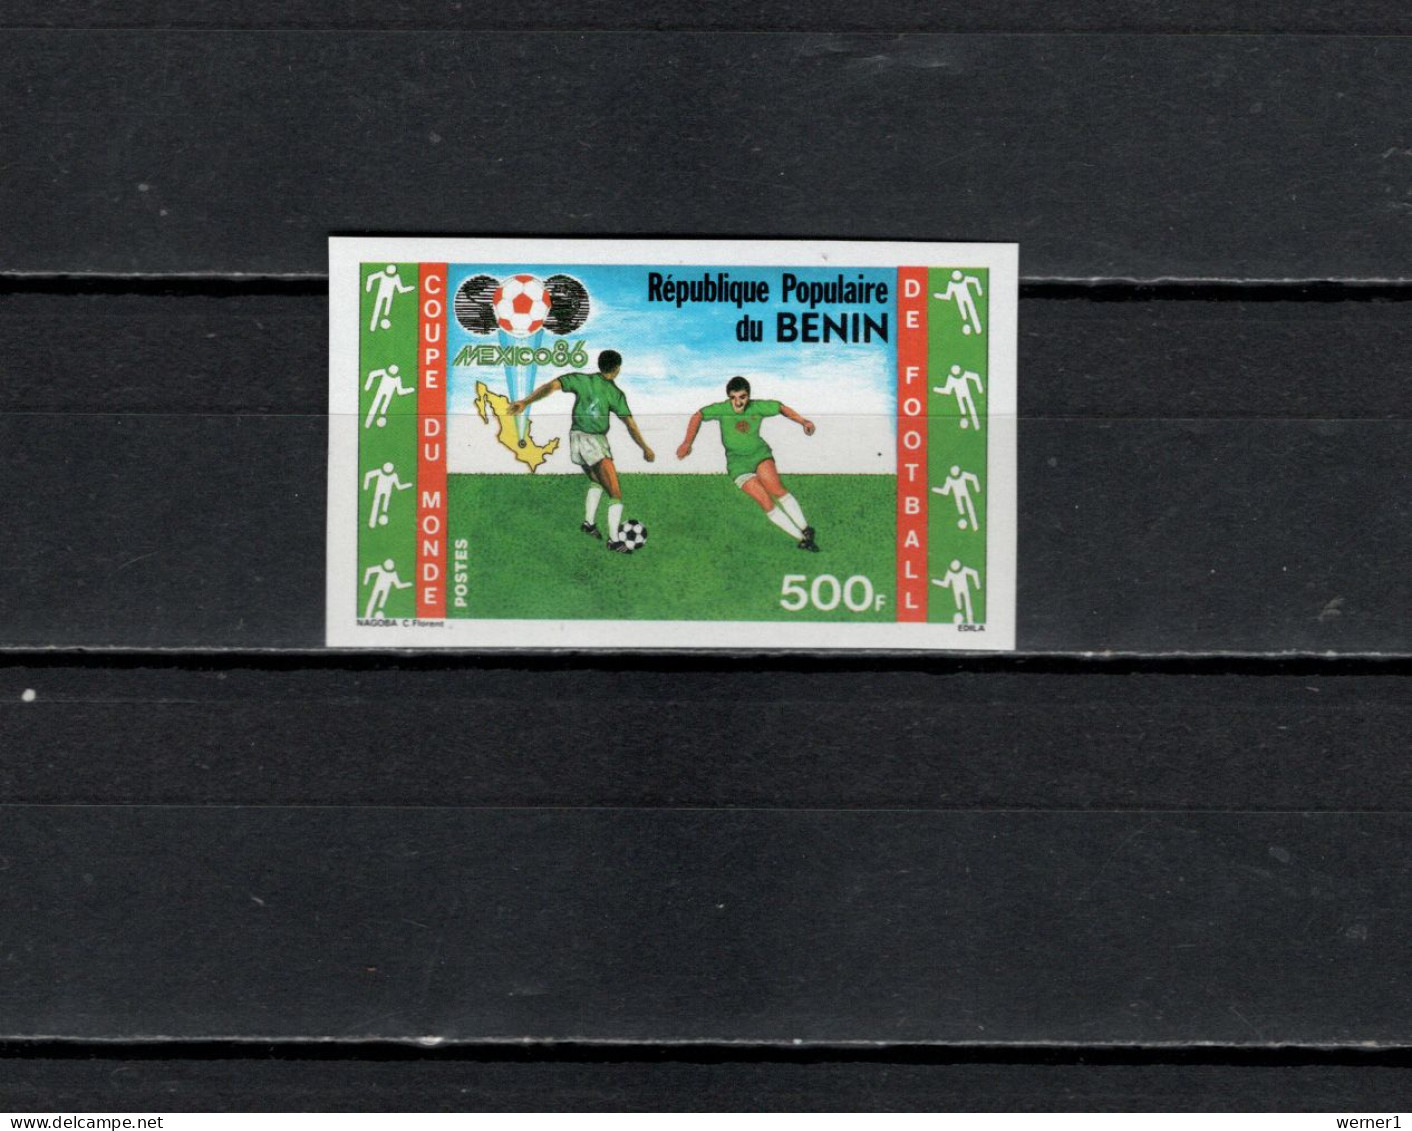 Benin 1986 Football Soccer World Cup Stamp Imperf. MNH -scarce- - 1986 – Mexico